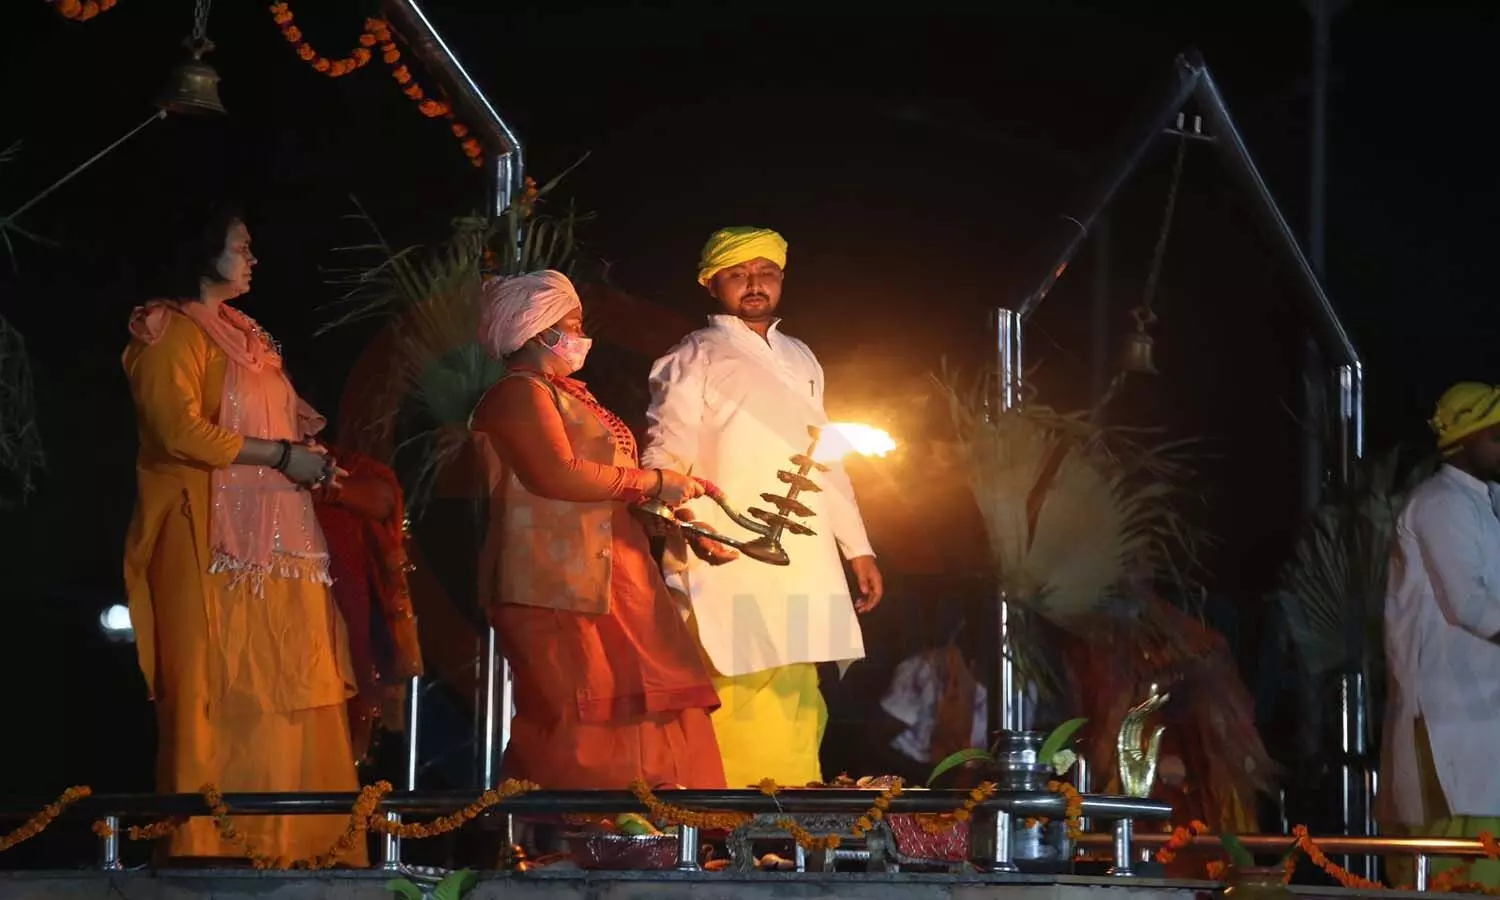 On the occasion of Guru Purnima, a grand aarti took place at Lucknows Mankameshwar Ghat, see photos